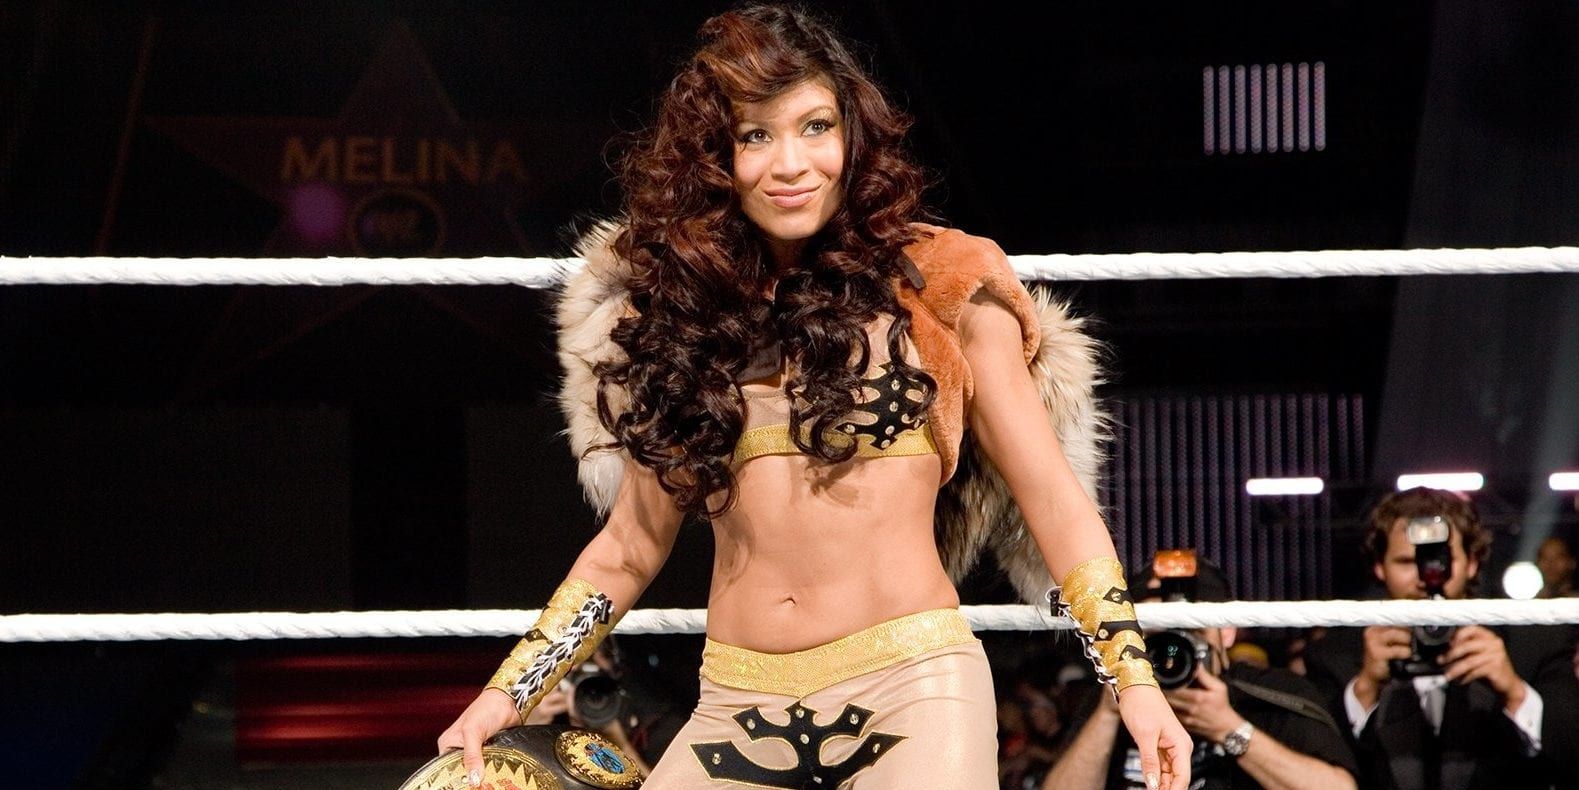 Melina is a three-time WWE Women's Champion